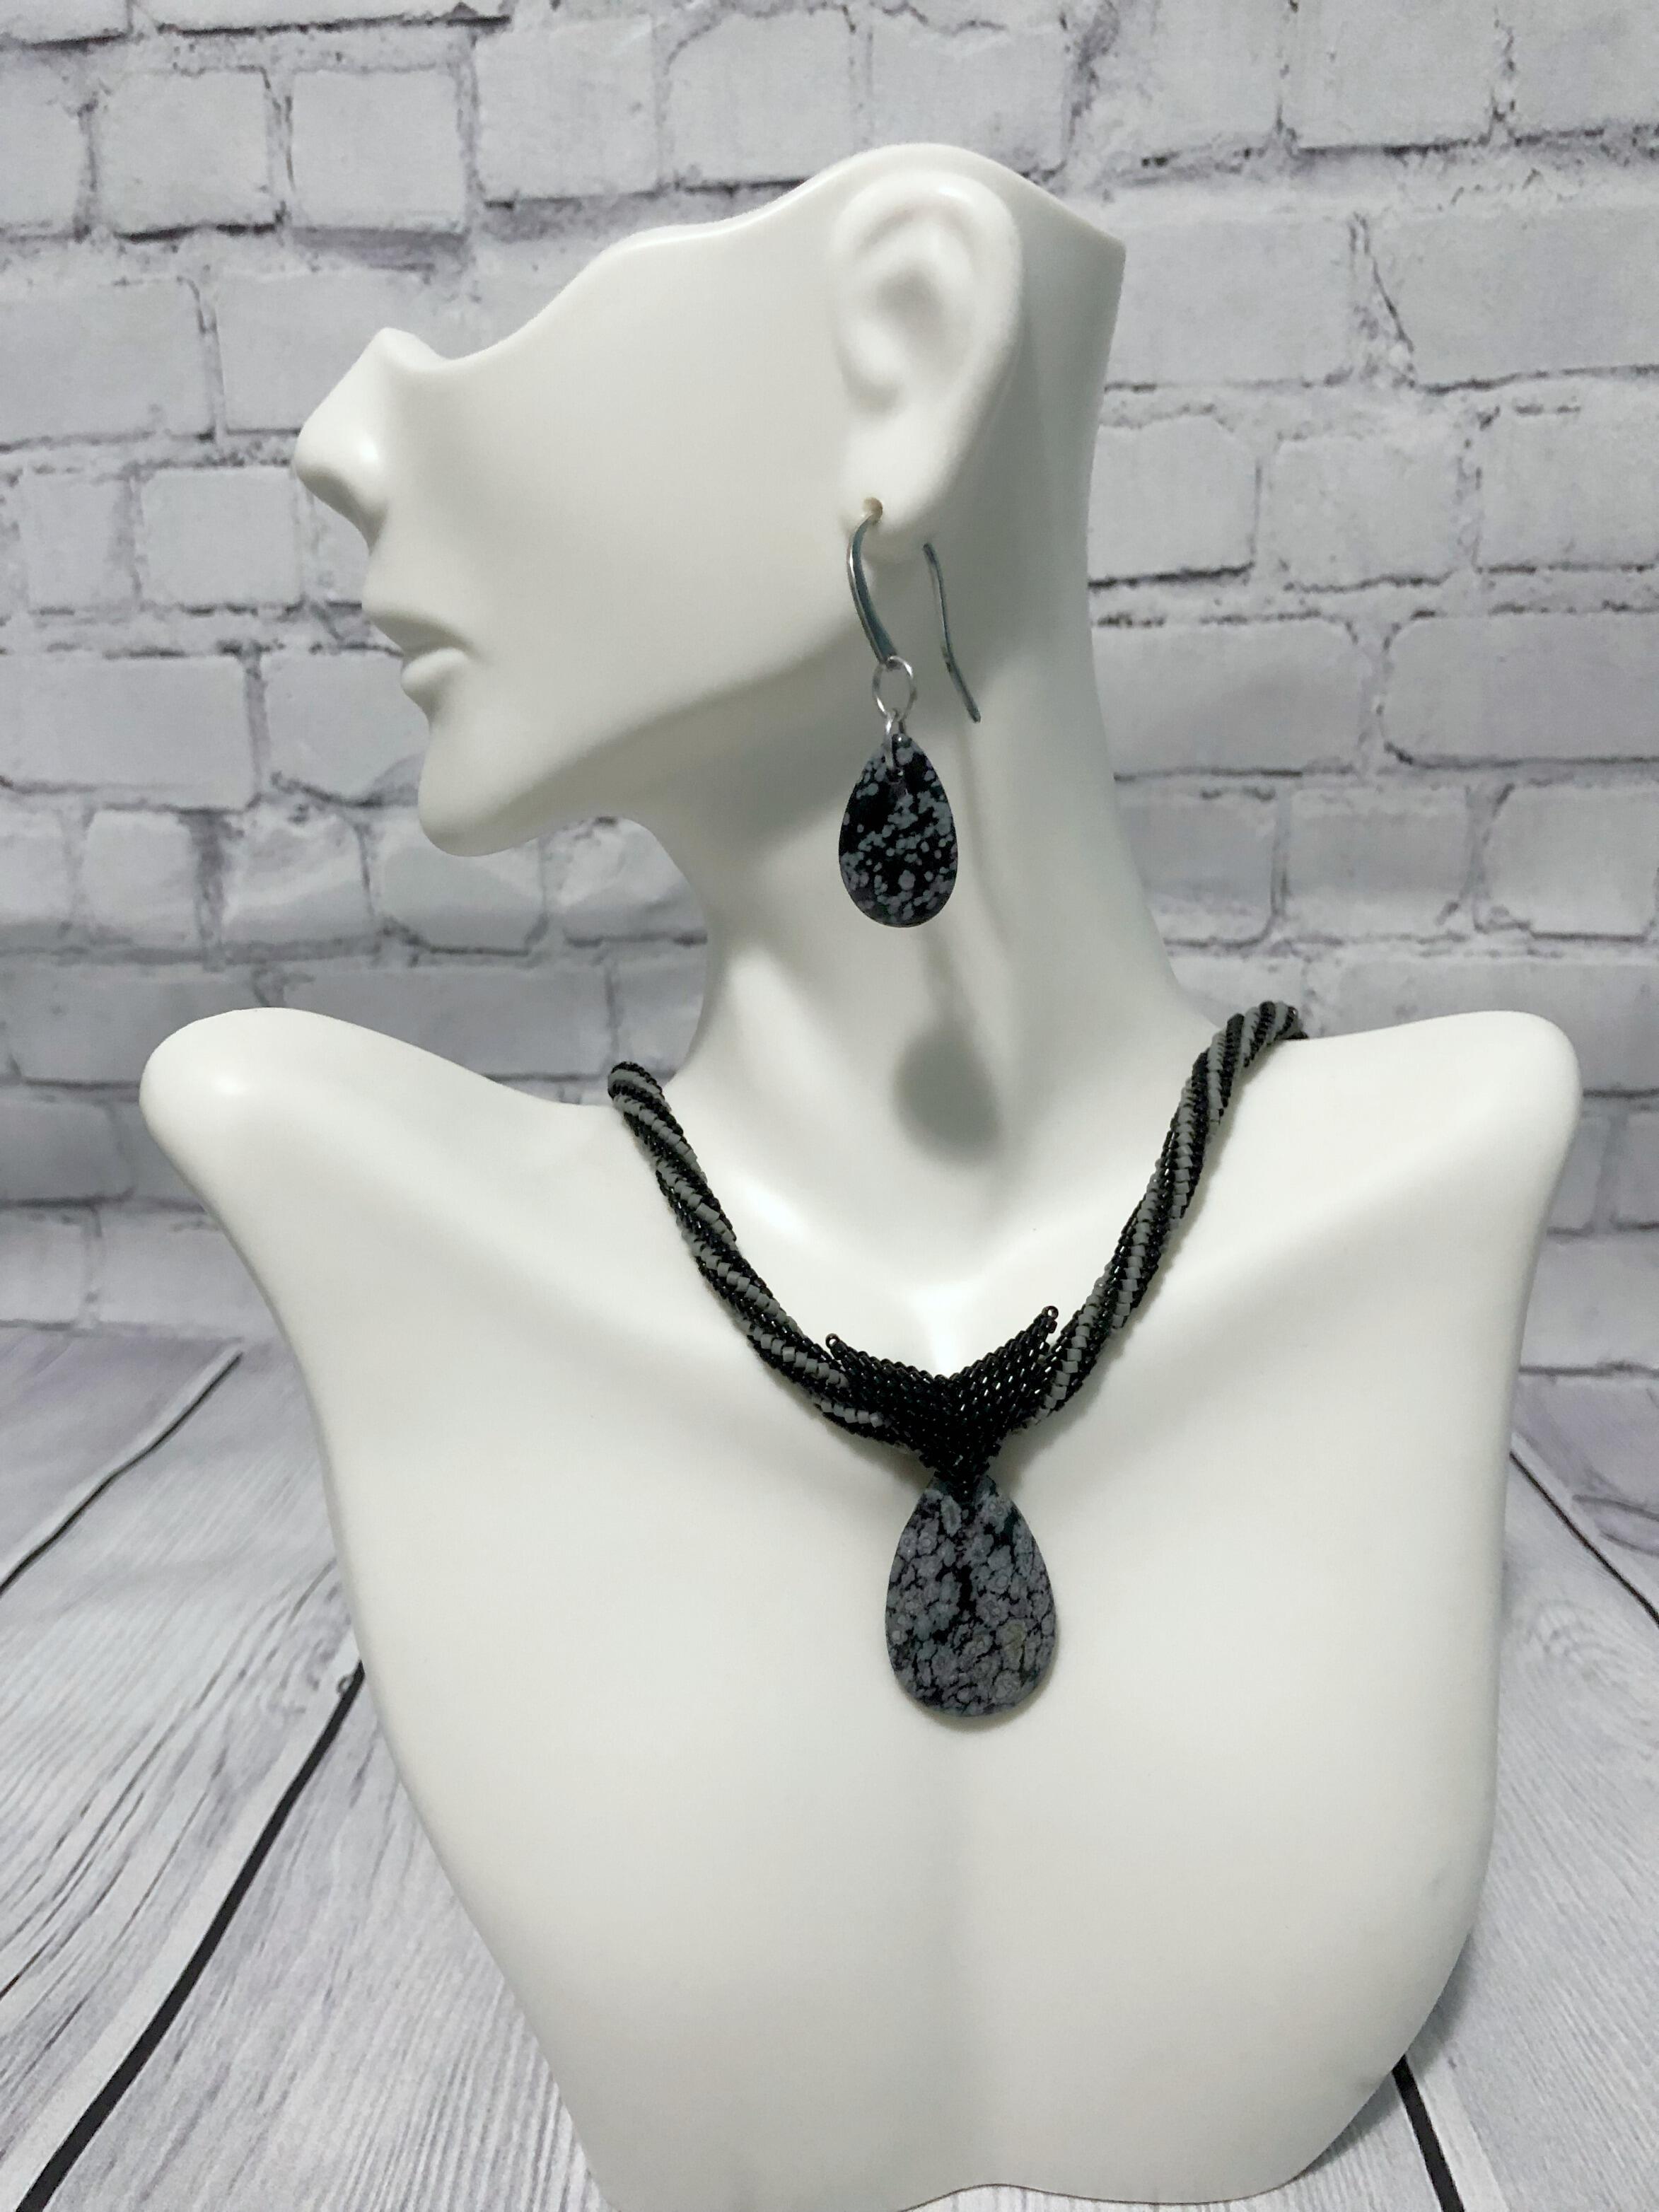 Earring and Necklace Set